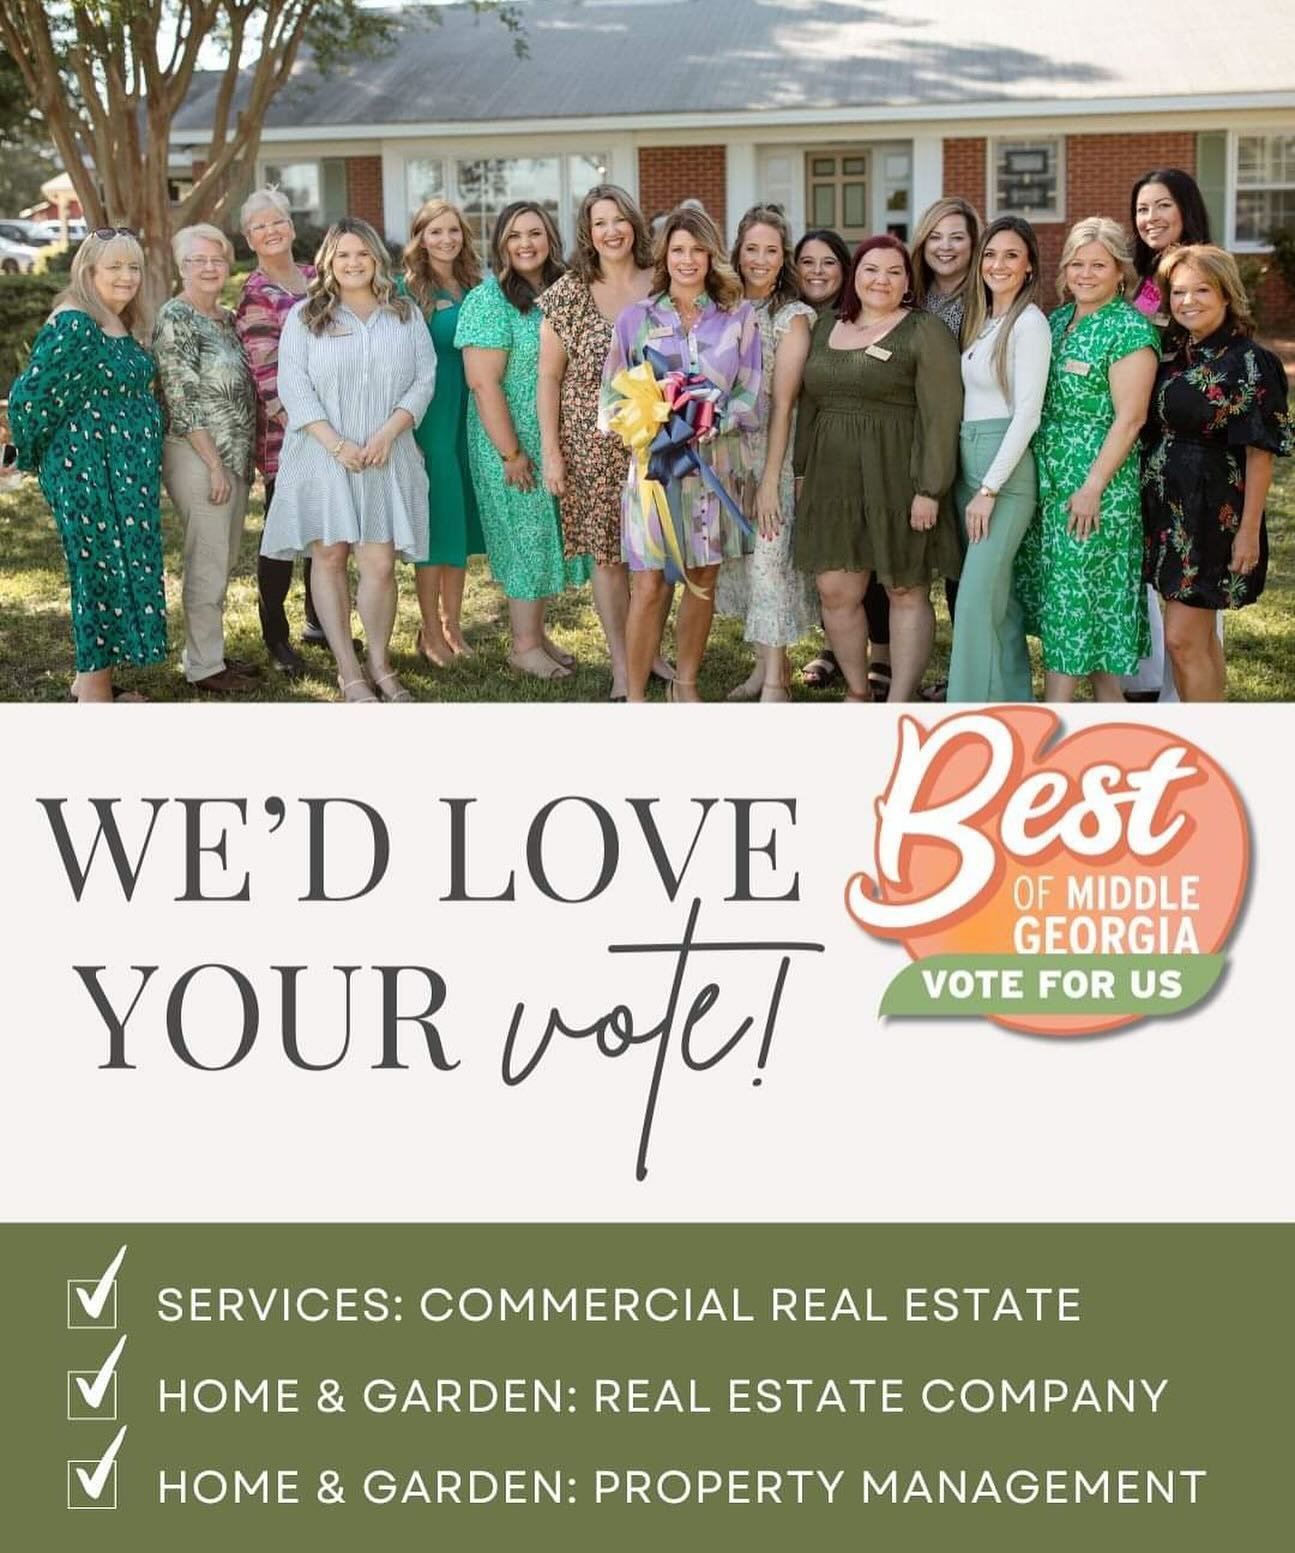 💚 THANK YOU for nominating us for THREE categories in the Best of Middle Georgia! Now, we would love your vote!! 💚

We&rsquo;d be honored to have your vote in:
Home &amp; Garden: Property Management &amp; Real Estate Company 
Services: Commercial R